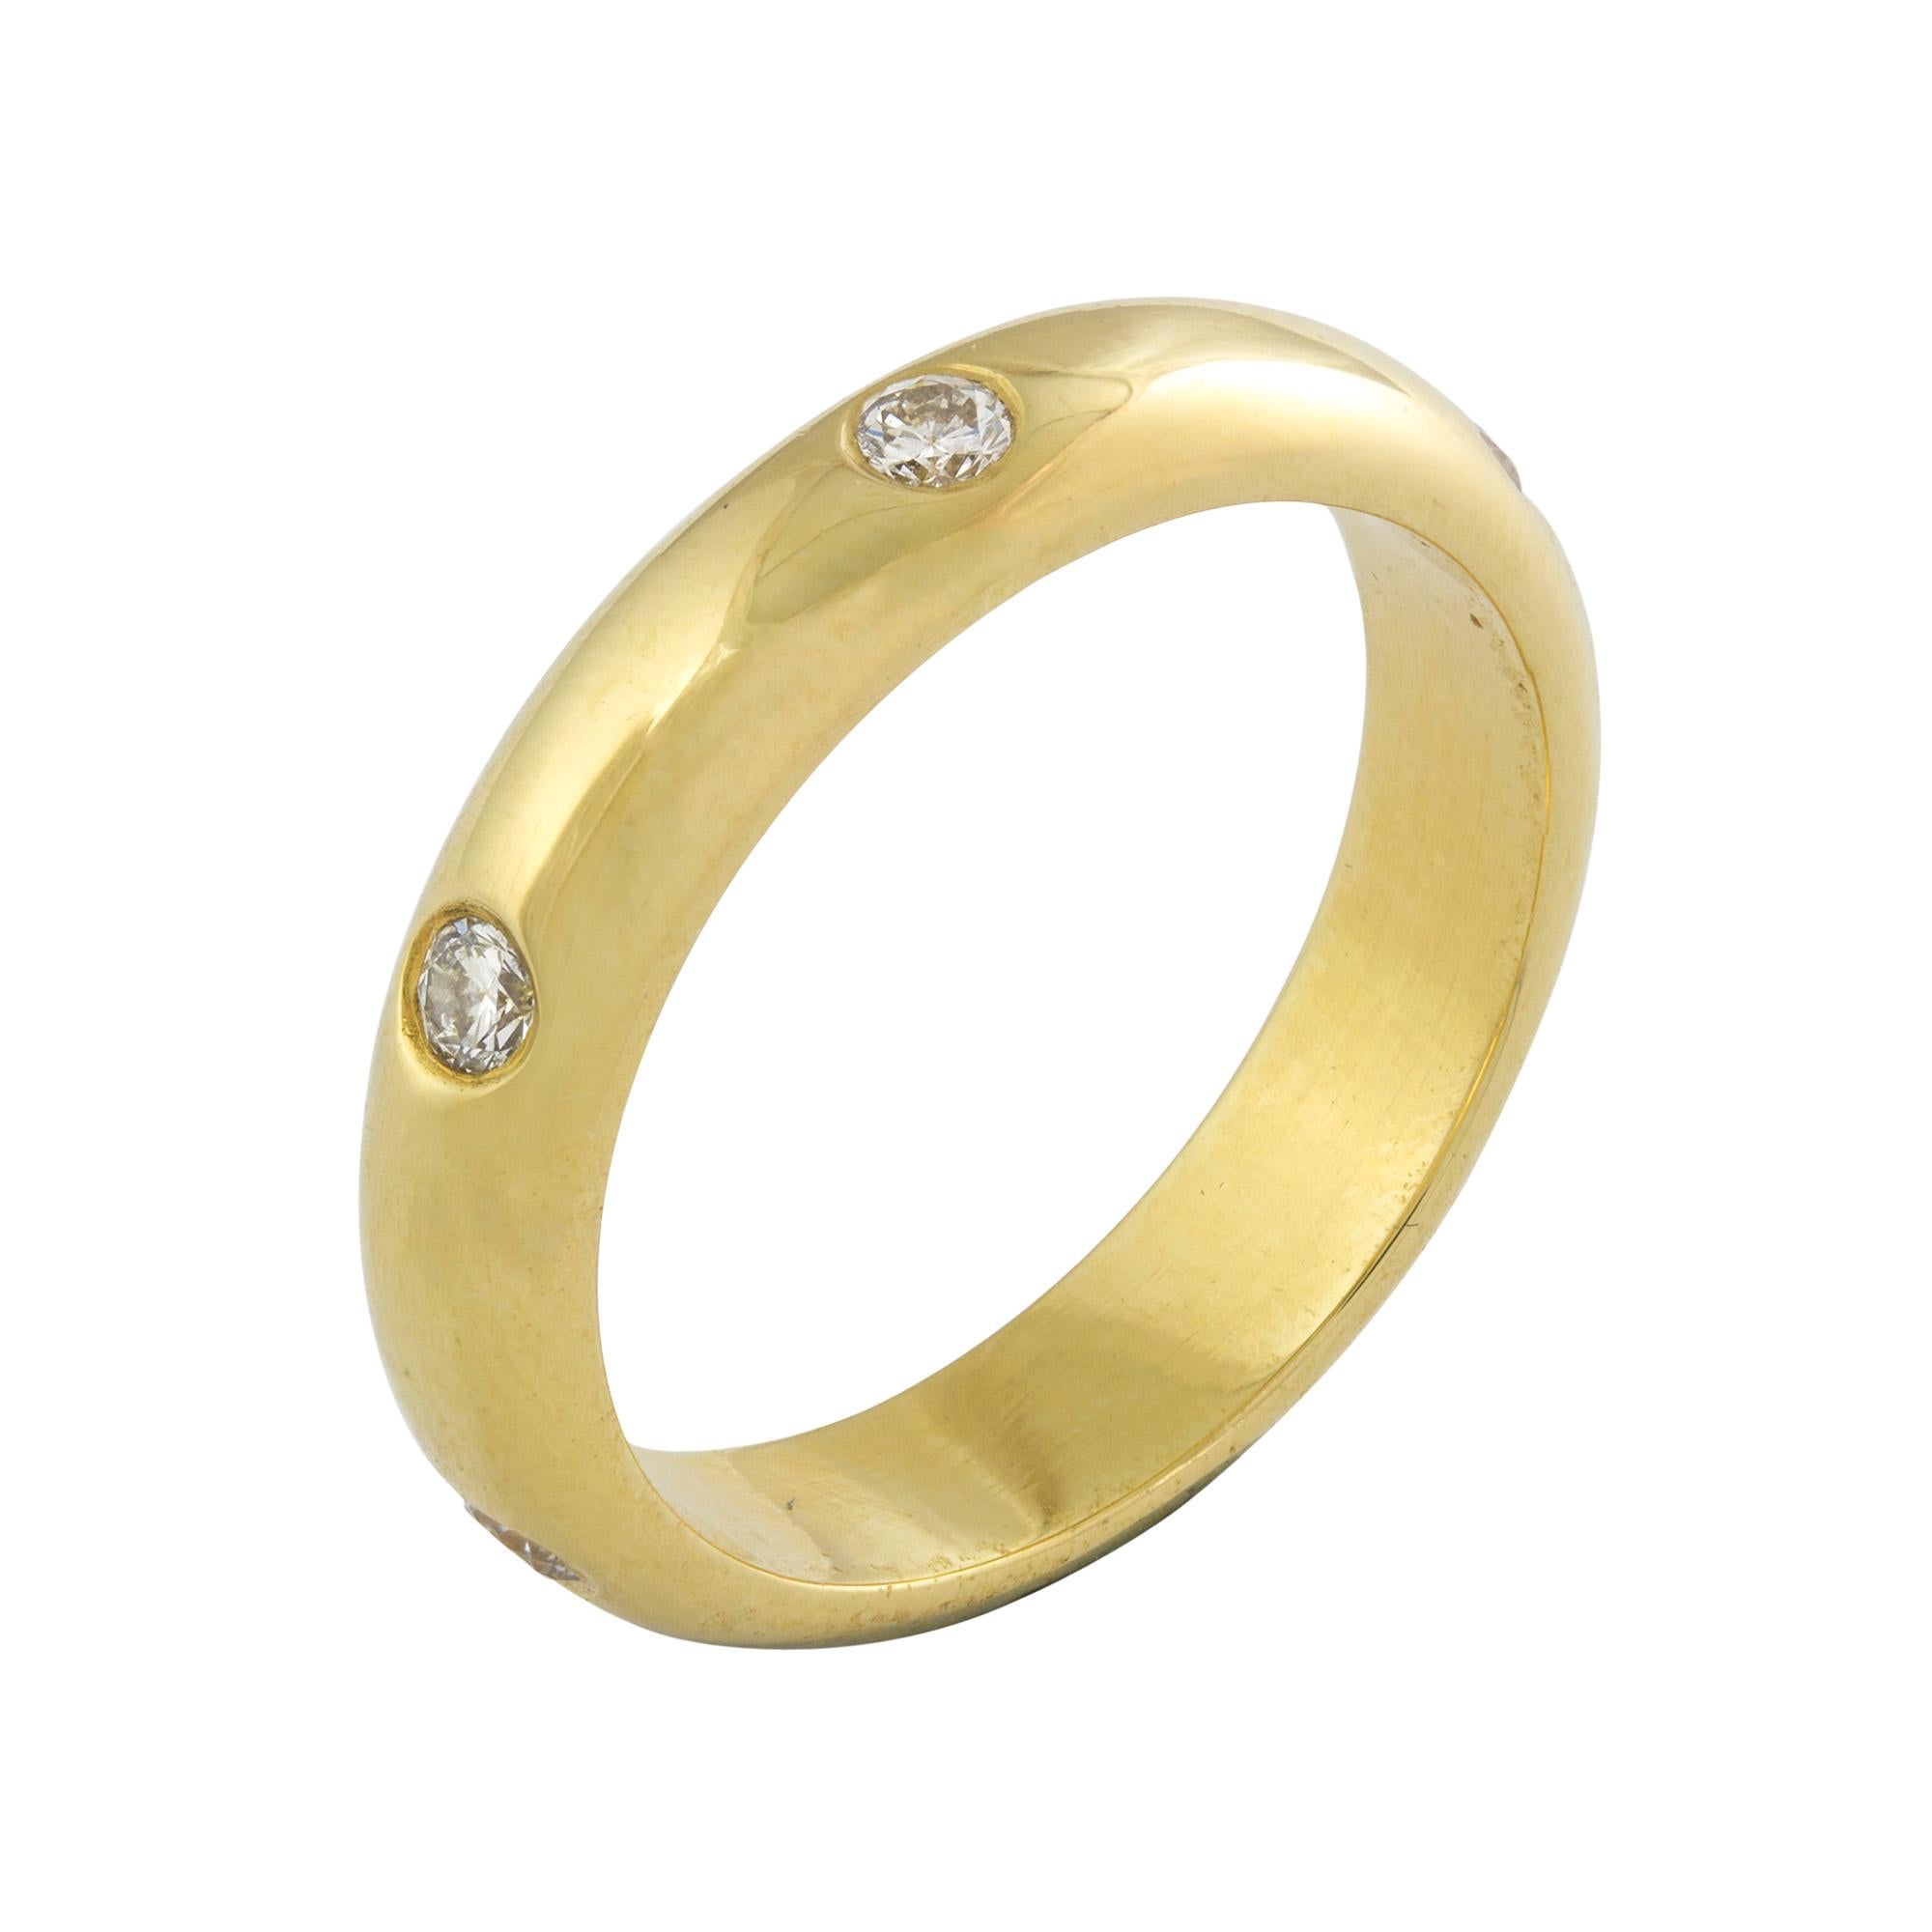 A diamond set wedding band, the yellow gold D-shape band set at intervals with six round brilliant-cut diamonds, weighing a total of 0.36 carats, hallmarked 18 carat gold, London 2003, finger size N, gross weight 6 grams.

This chic gold and diamond